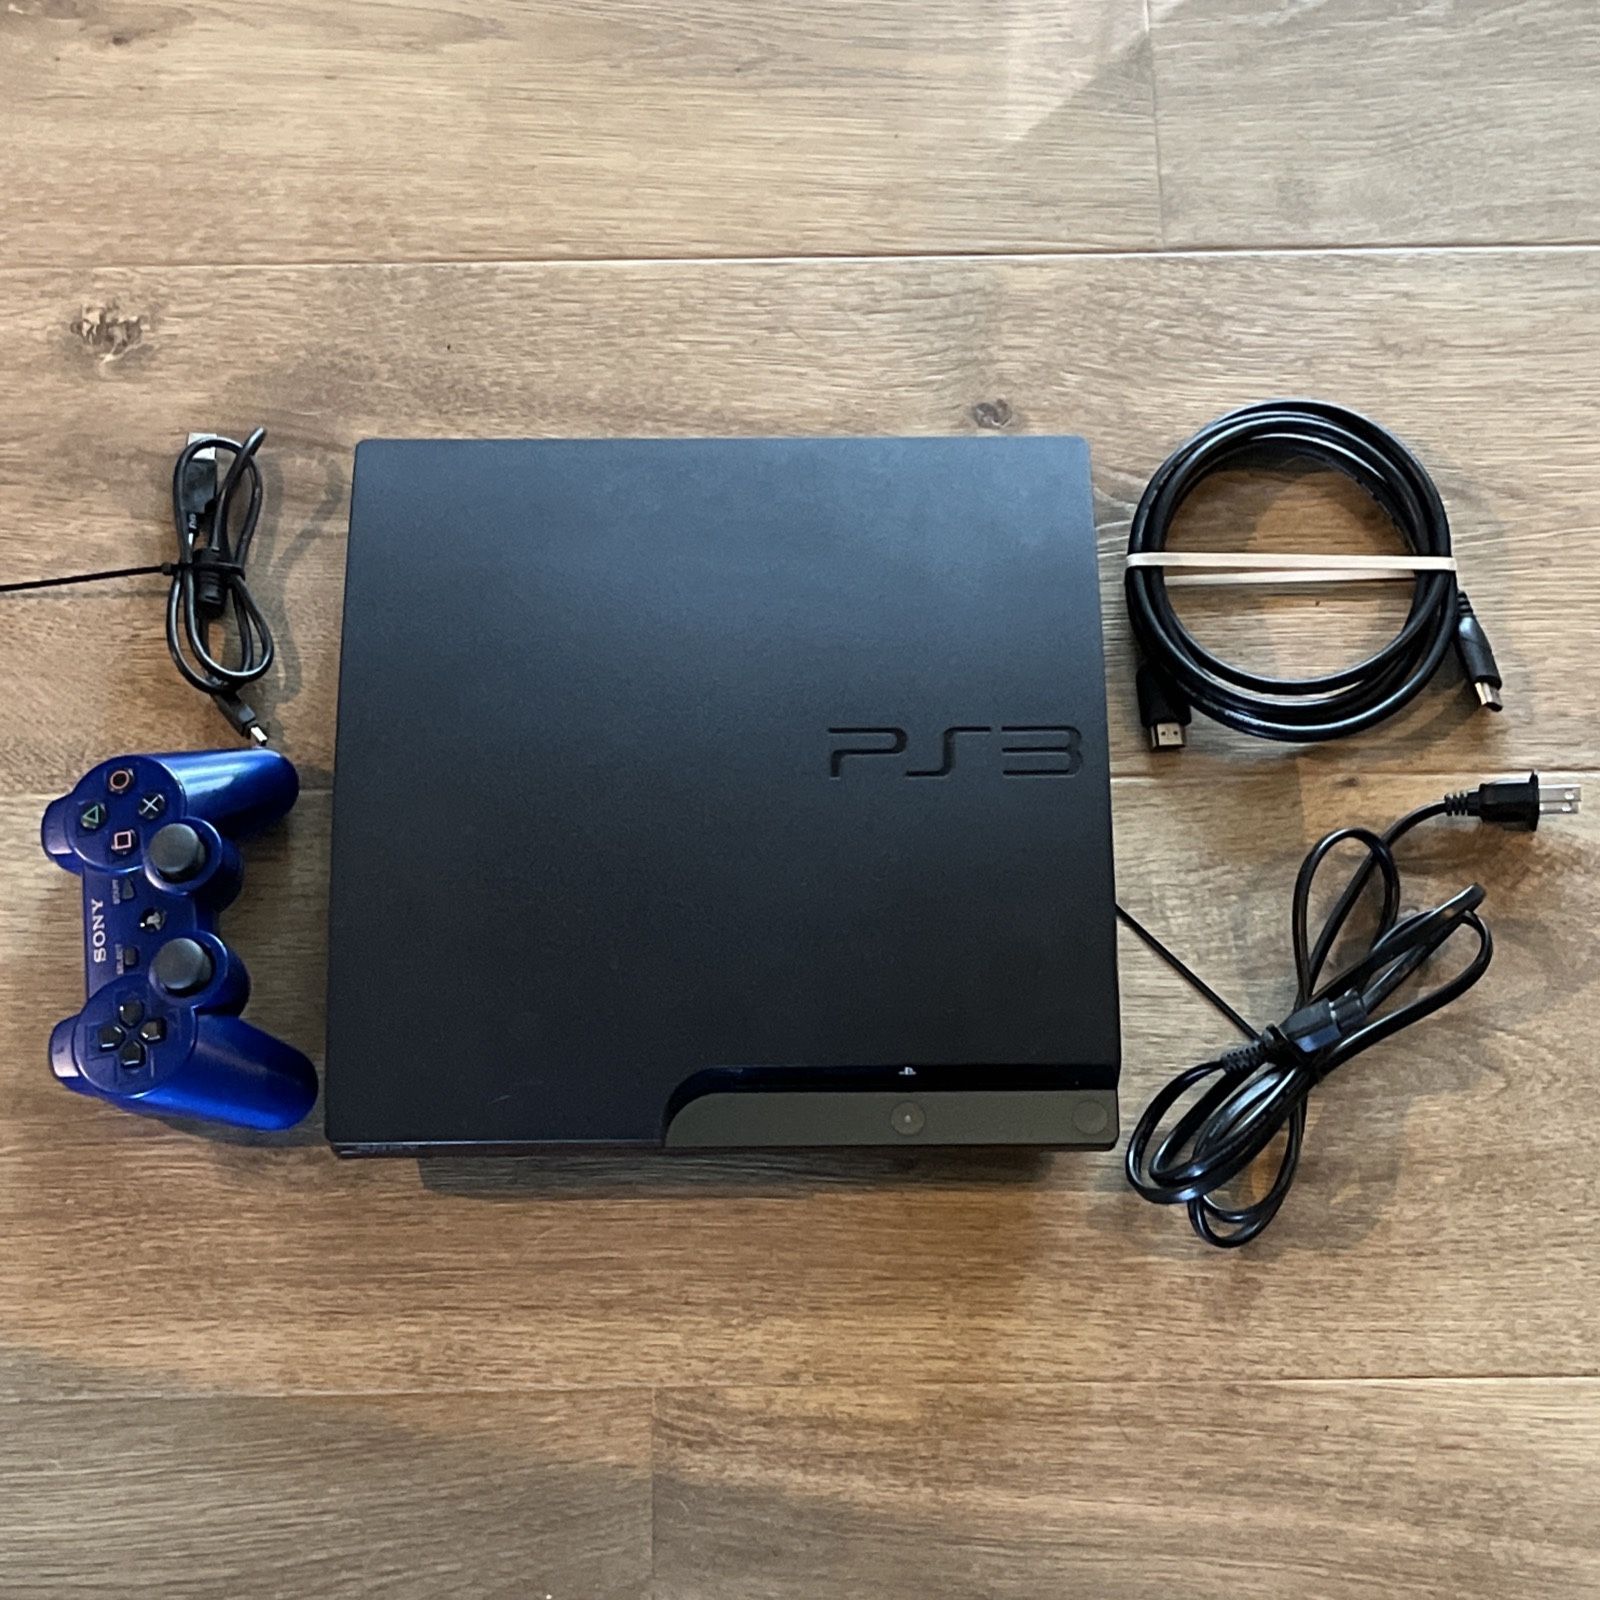 Sony Playstation 3 PS3 Slim 320 GB with Controller and Cables